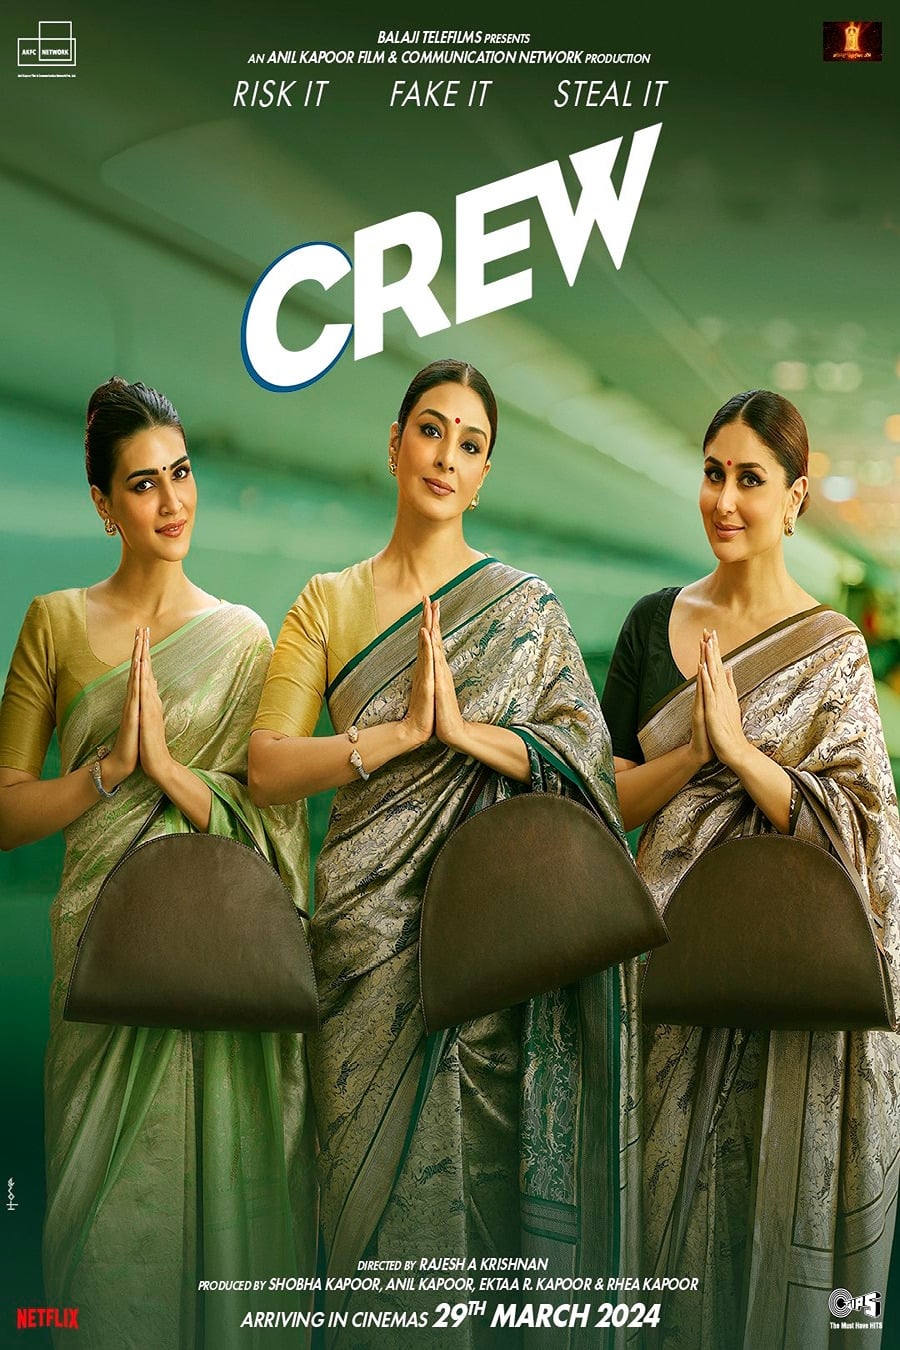 Poster for the movie "Crew"